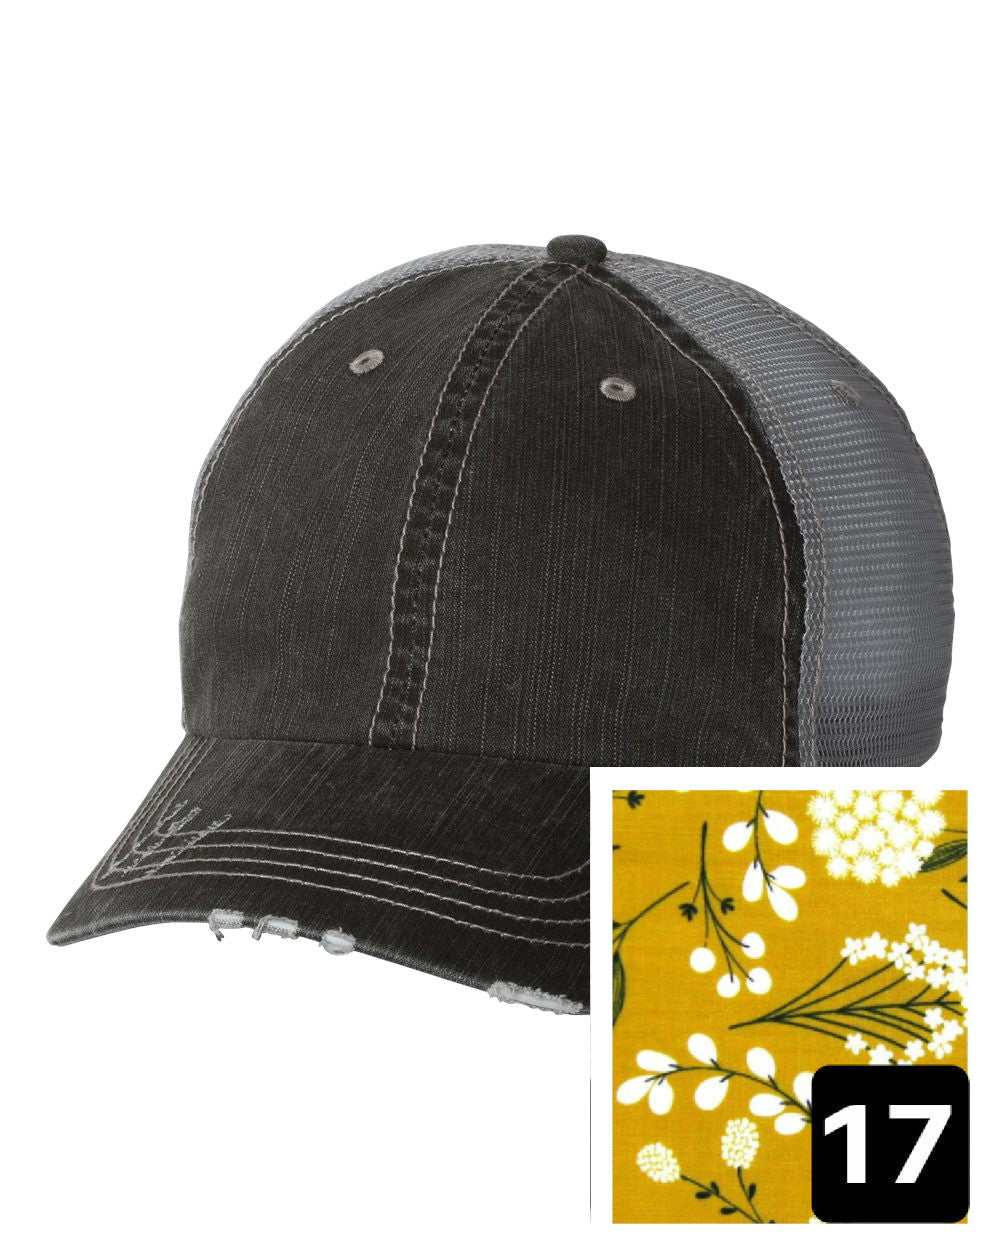 gray distressed trucker hat with light blue dotted fabric state of Georgia